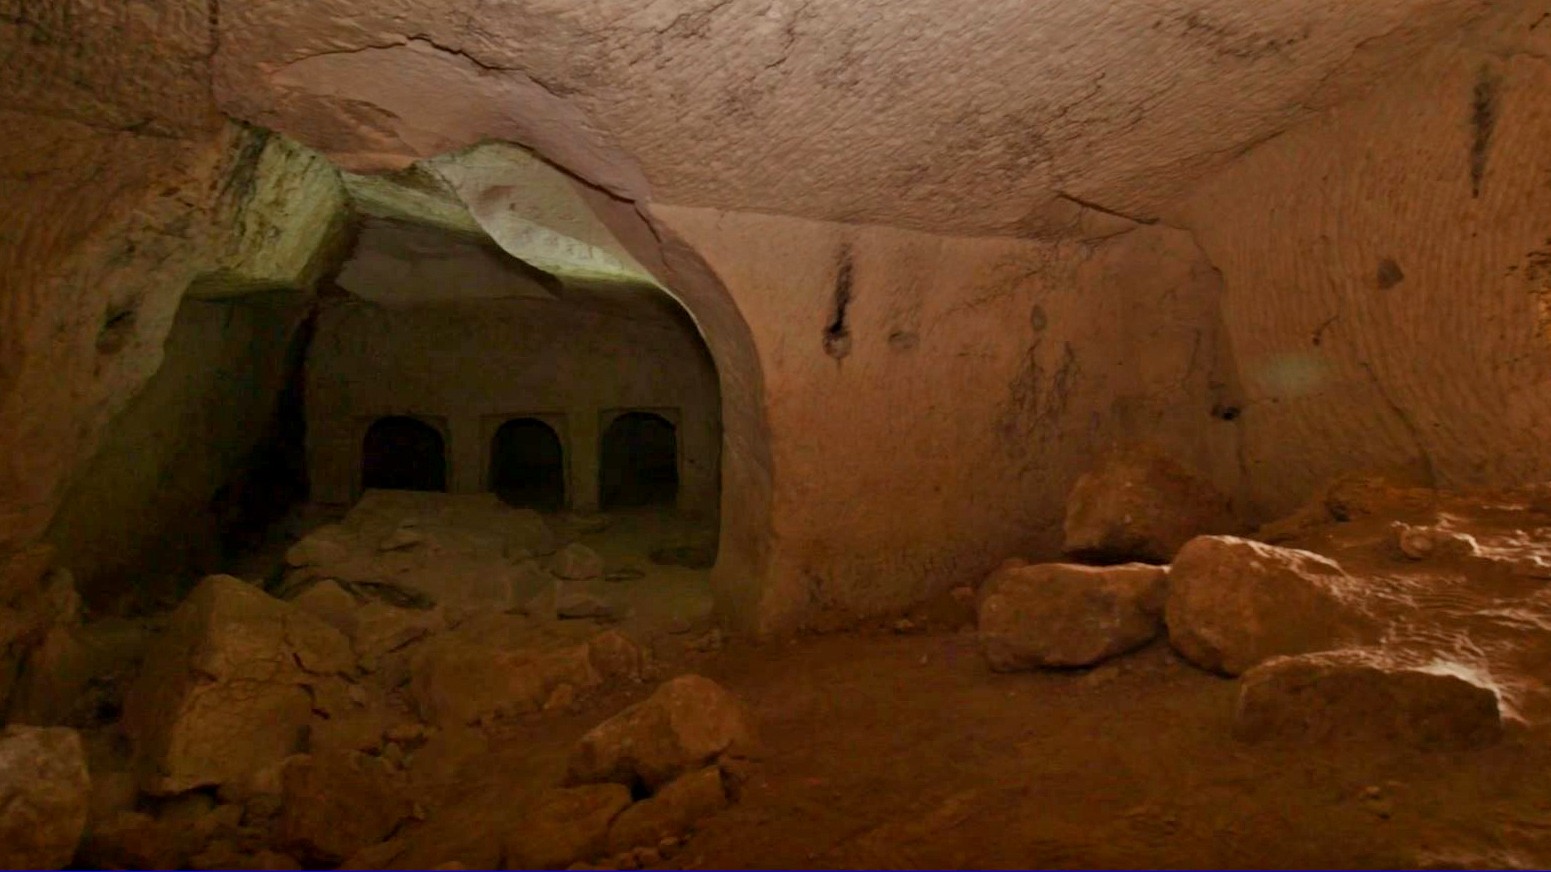 Here we see in inside of Salome's cave. There is a circular entrance on the left which leads to three rectangular doorways.